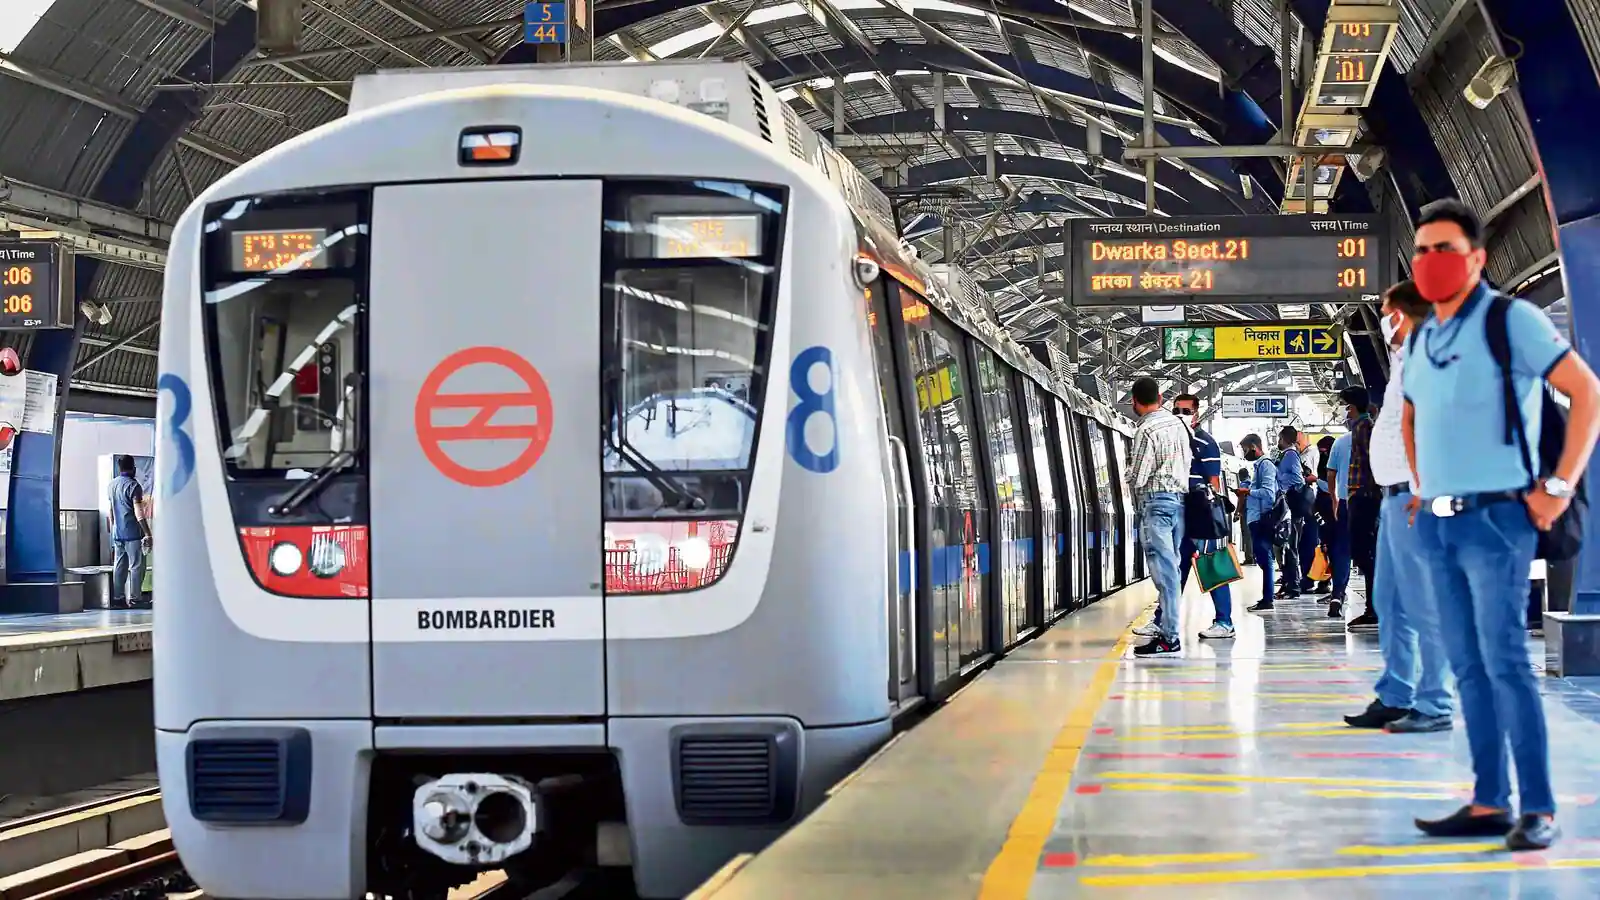 Delhi Metro: Good News! Now the card will not be needed for traveling in the metro! DMRC is introducing new facility, see details here